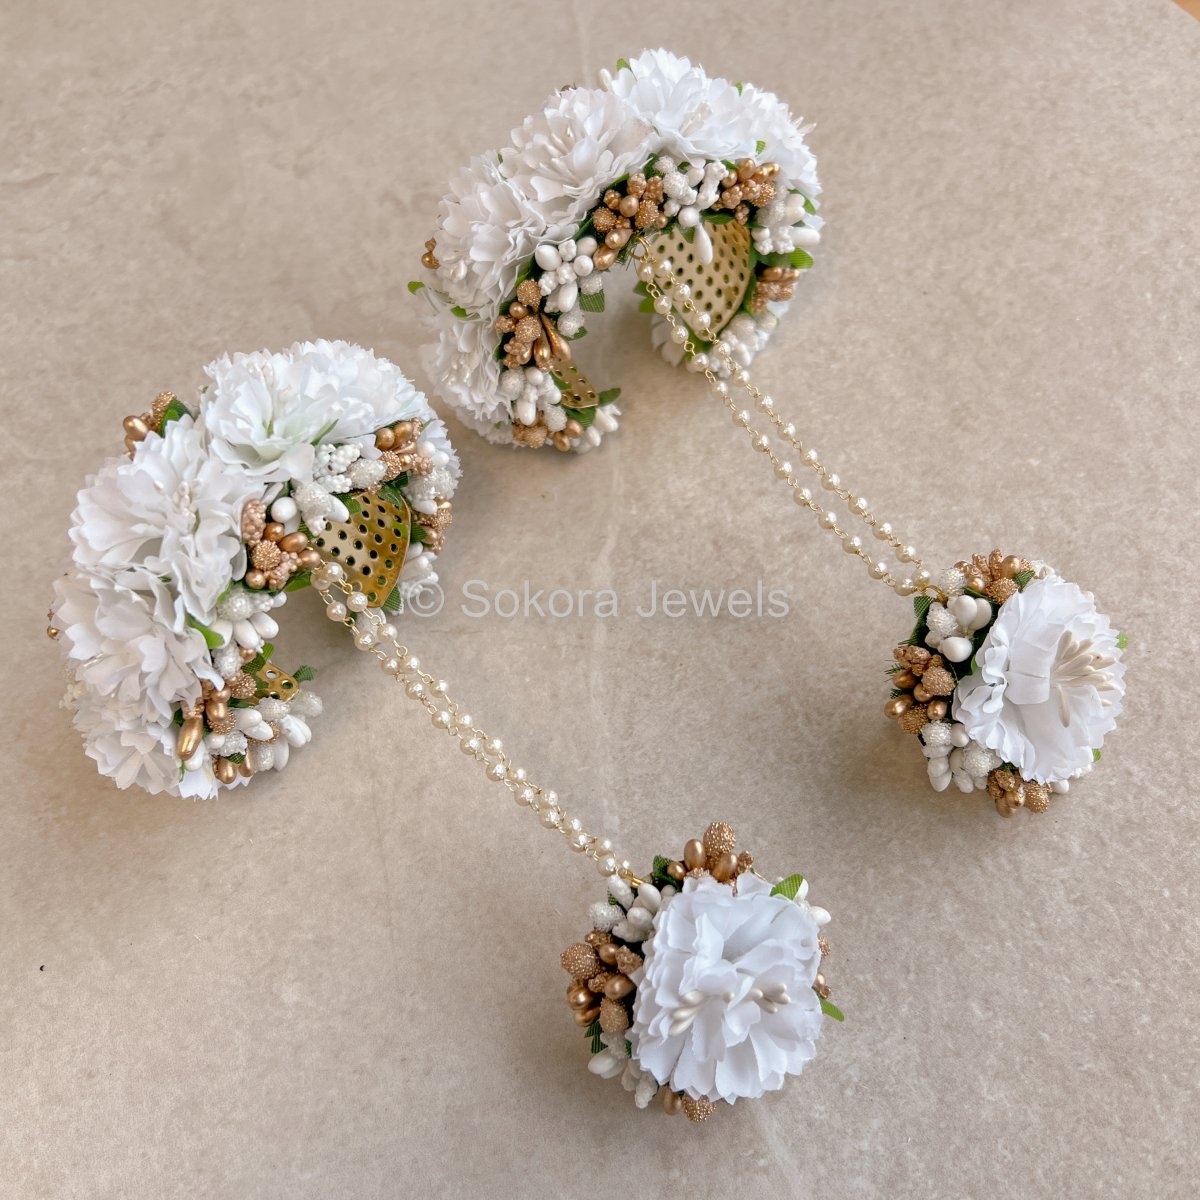 White Floral Hand Pieces - SOKORA JEWELSWhite Floral Hand Pieces